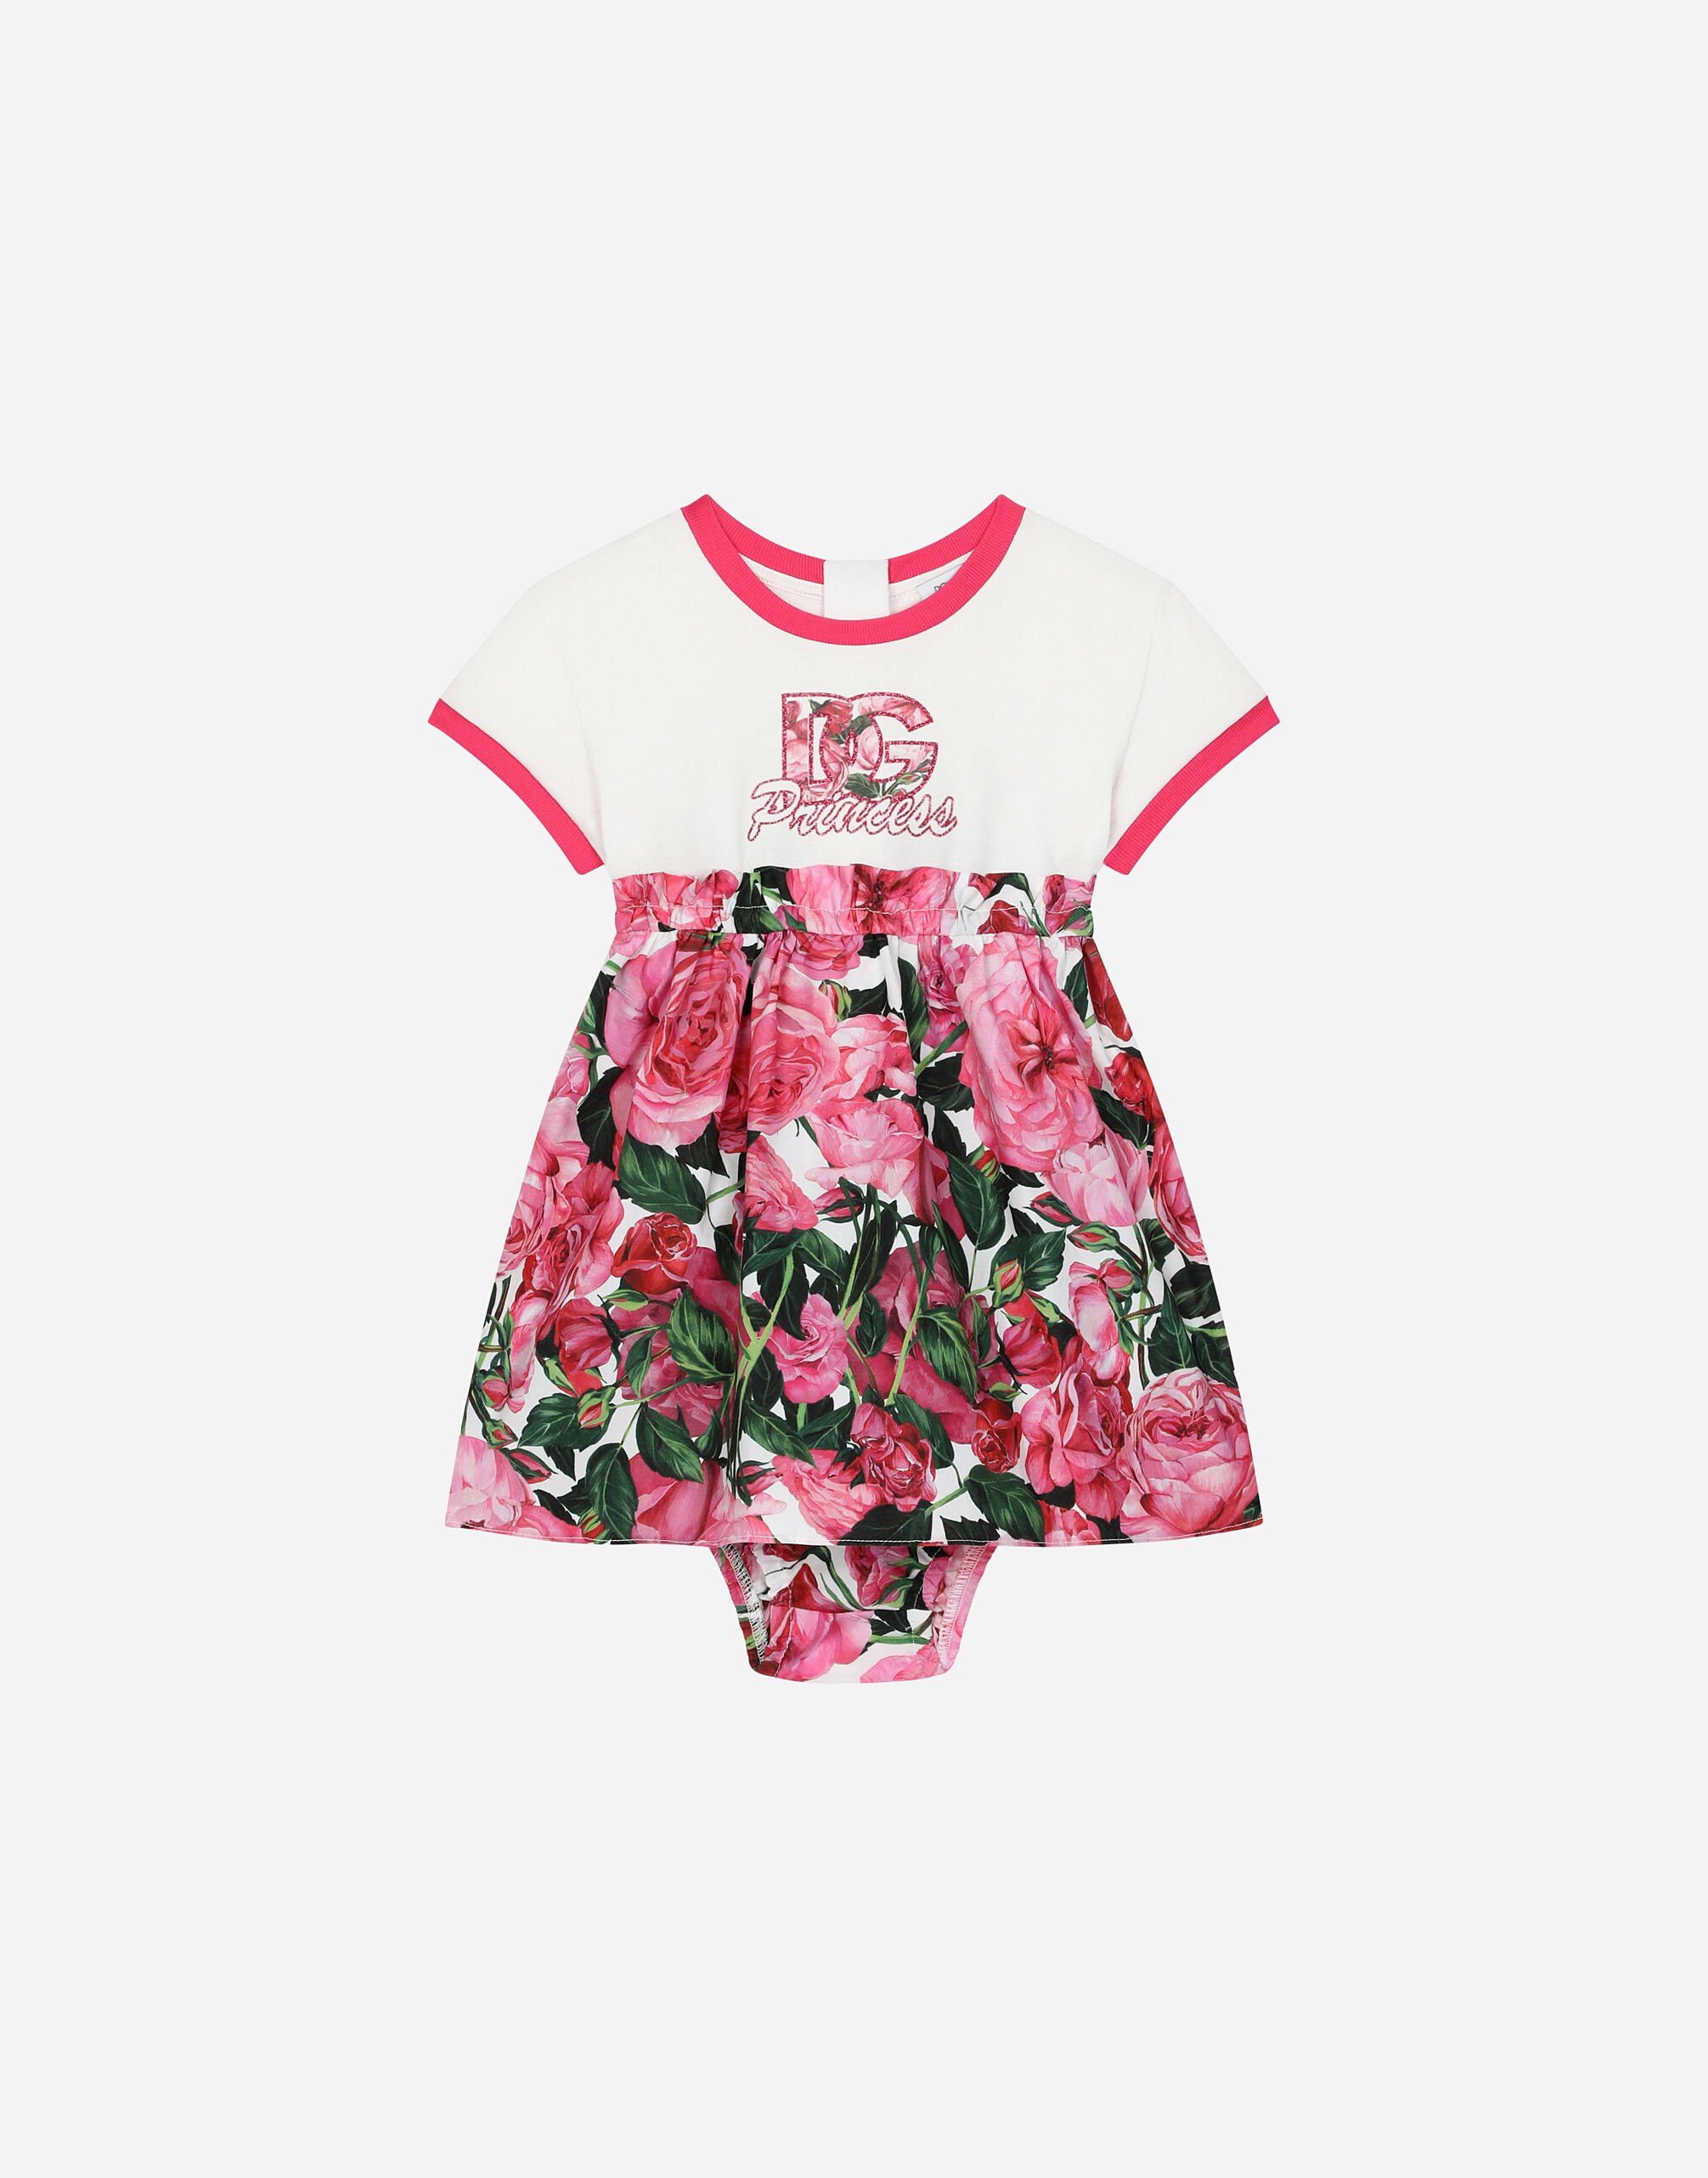 ${brand} Poplin and jersey dress with rose print over a white background ${colorDescription} ${masterID}